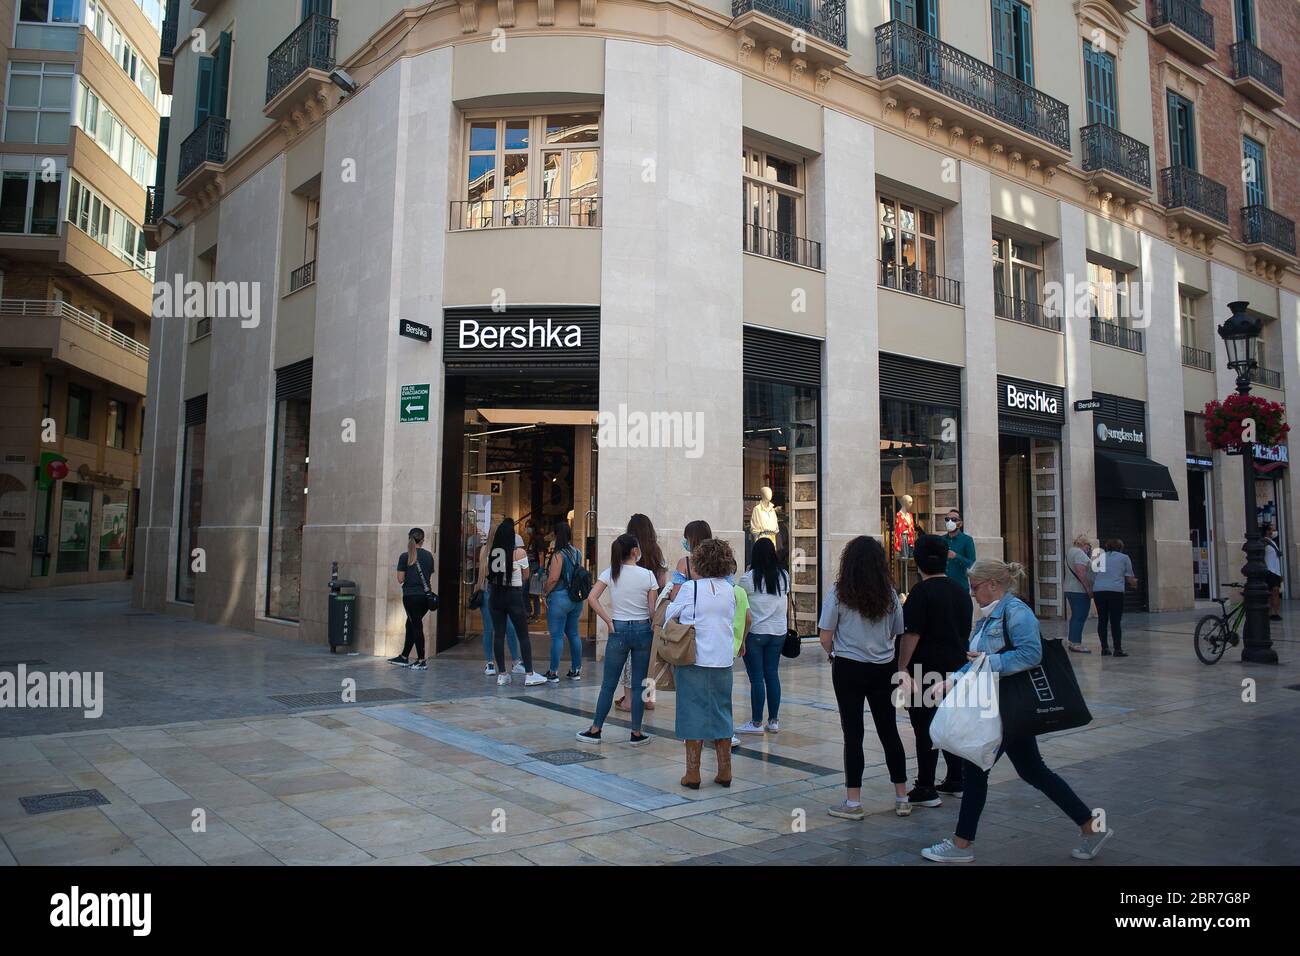 May 20, 2020, Malaga, Spain: People wait in queue outside 'Bershka'  clothing store at Marques de Larios street during a nationwide partial  lockdown.Spain is going through a plan of down-scaling towards a ''